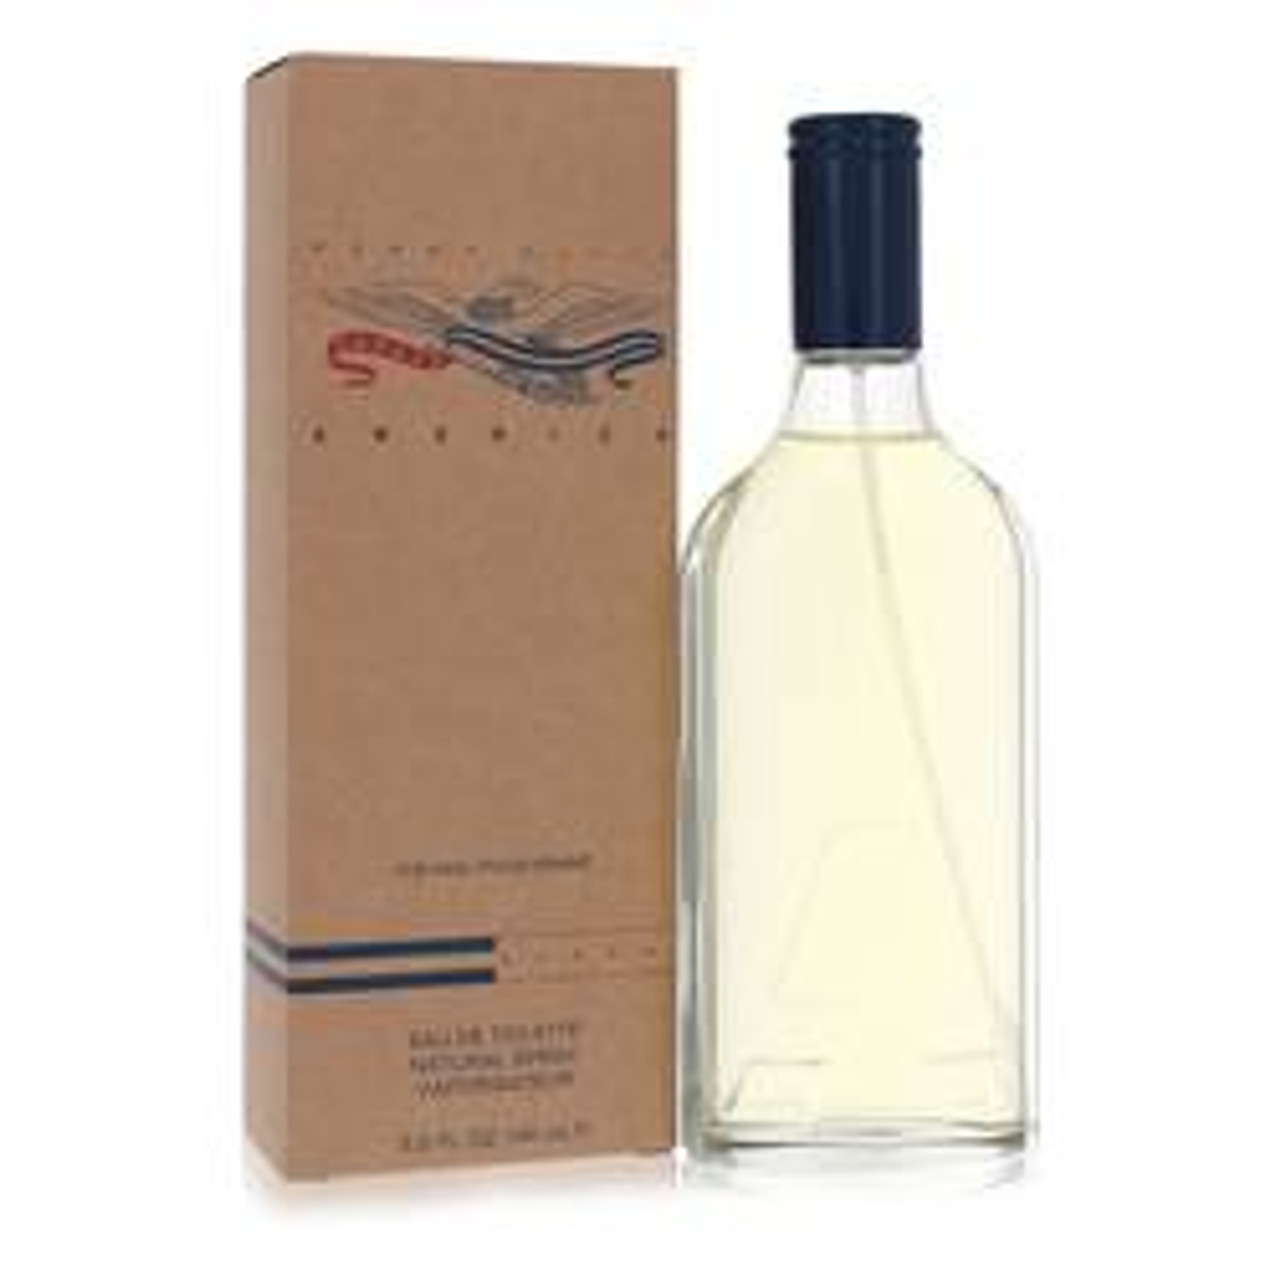 America Cologne By Perry Ellis Eau De Toilette Spray 5 oz for Men - [From 55.00 - Choose pk Qty ] - *Ships from Miami